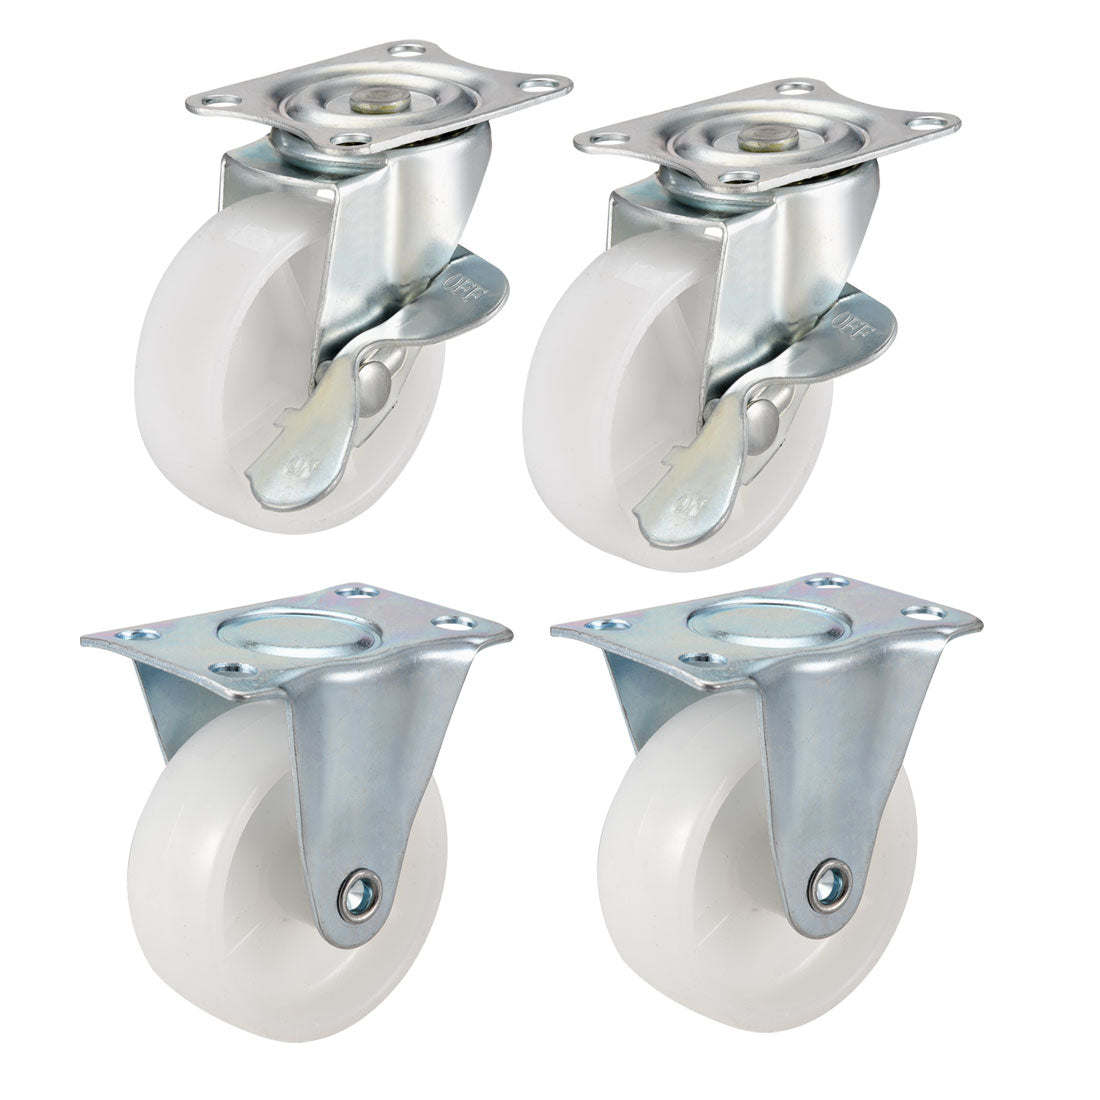 Uxcell Uxcell 3 Inch PP Top Plate Mounted Caster Wheel 110lb Capacity (2 Pcs Swivel with Brake, 2 Pcs Fixed)  4 Pcs